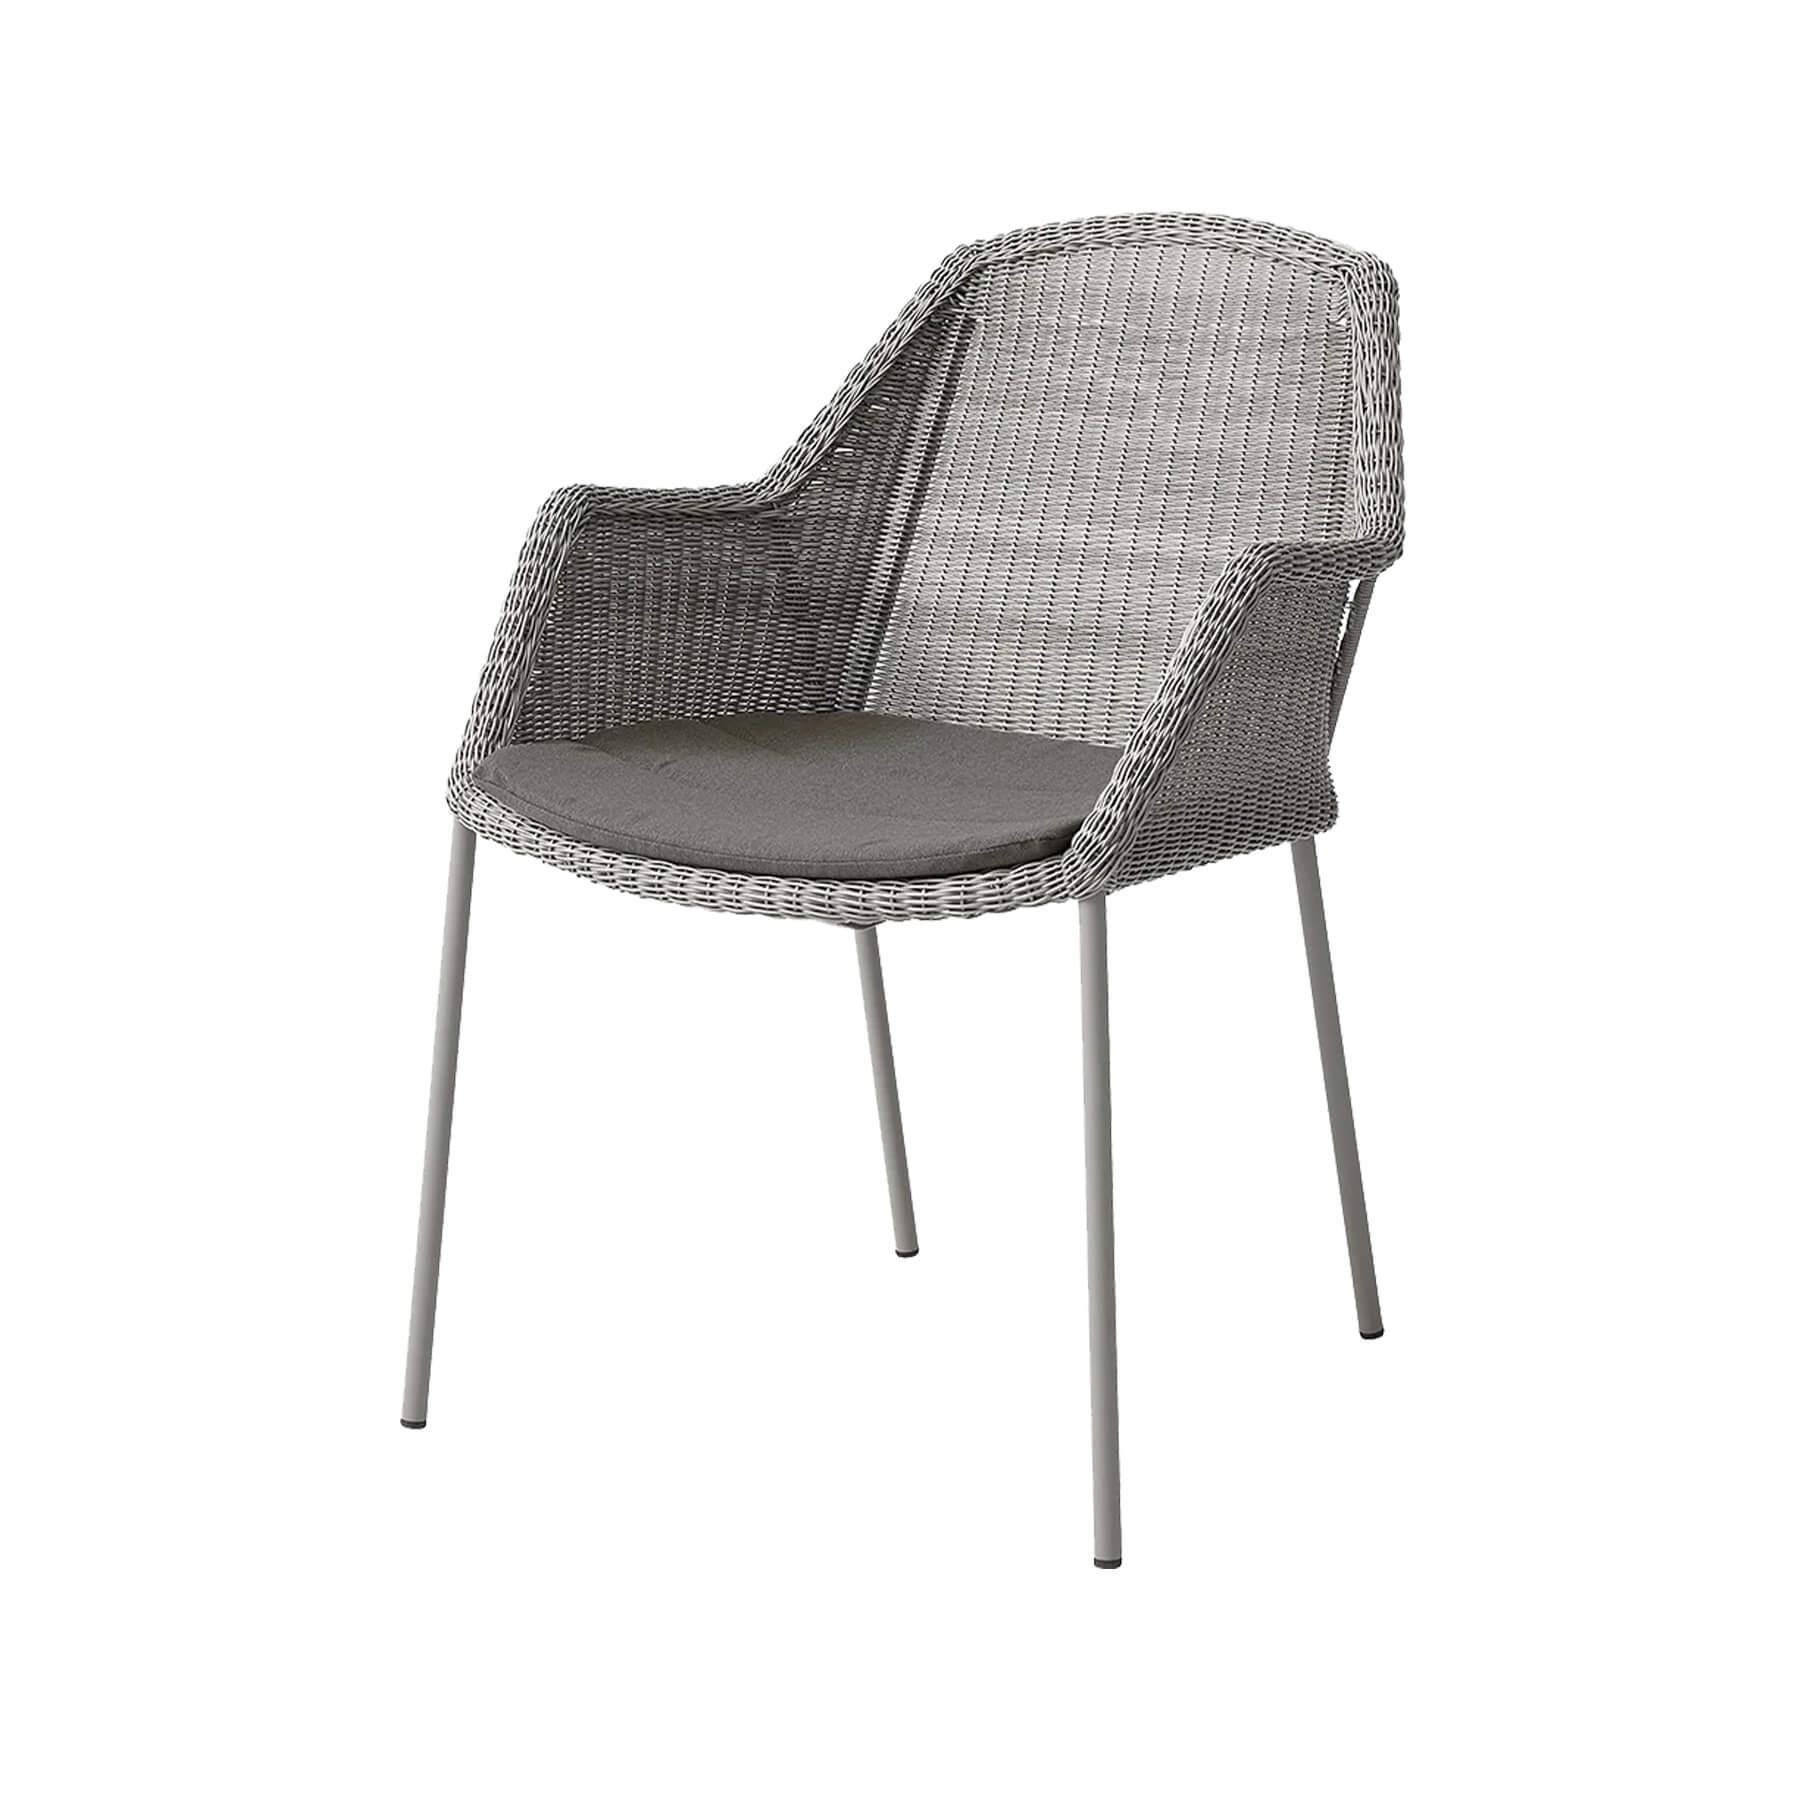 Caneline Breeze Outdoor Chair Taupe Seat Taupe Cushion Grey